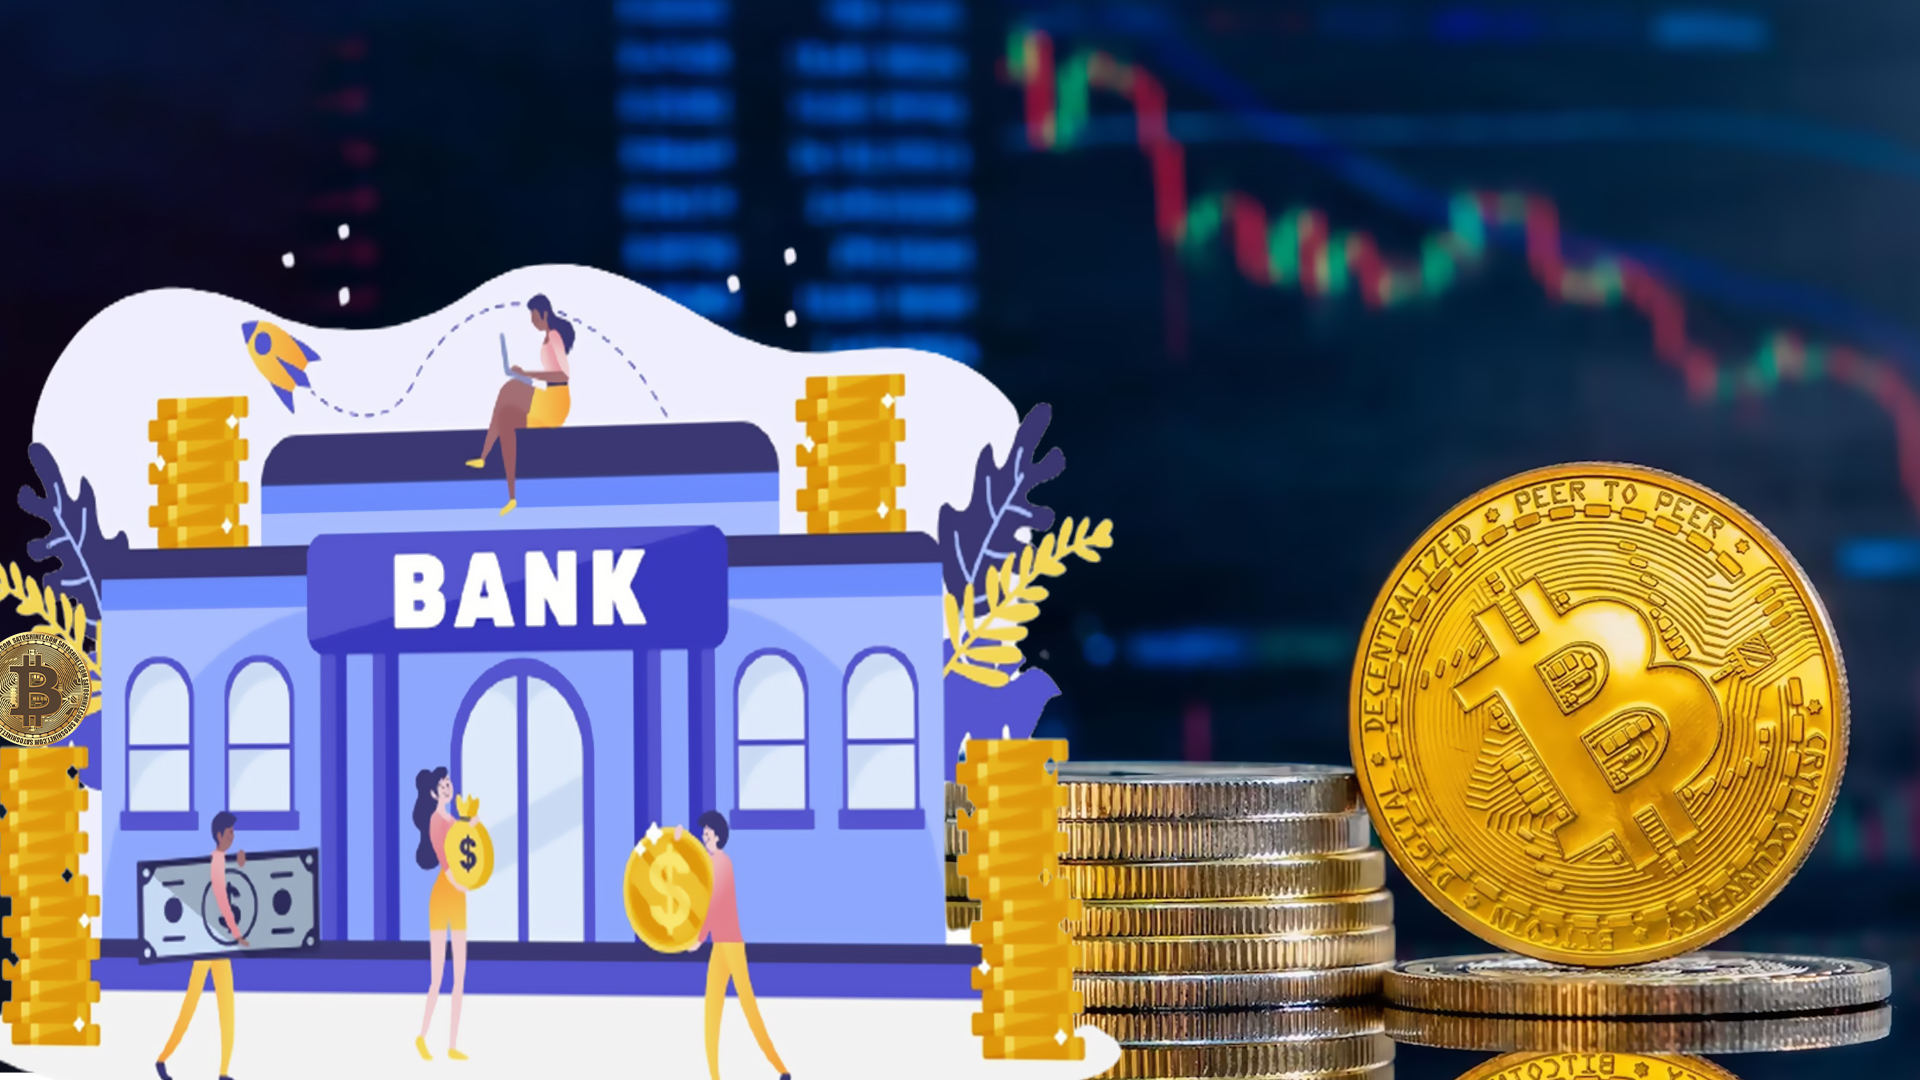 Digital Banks For Crypto Users In Developing Countries